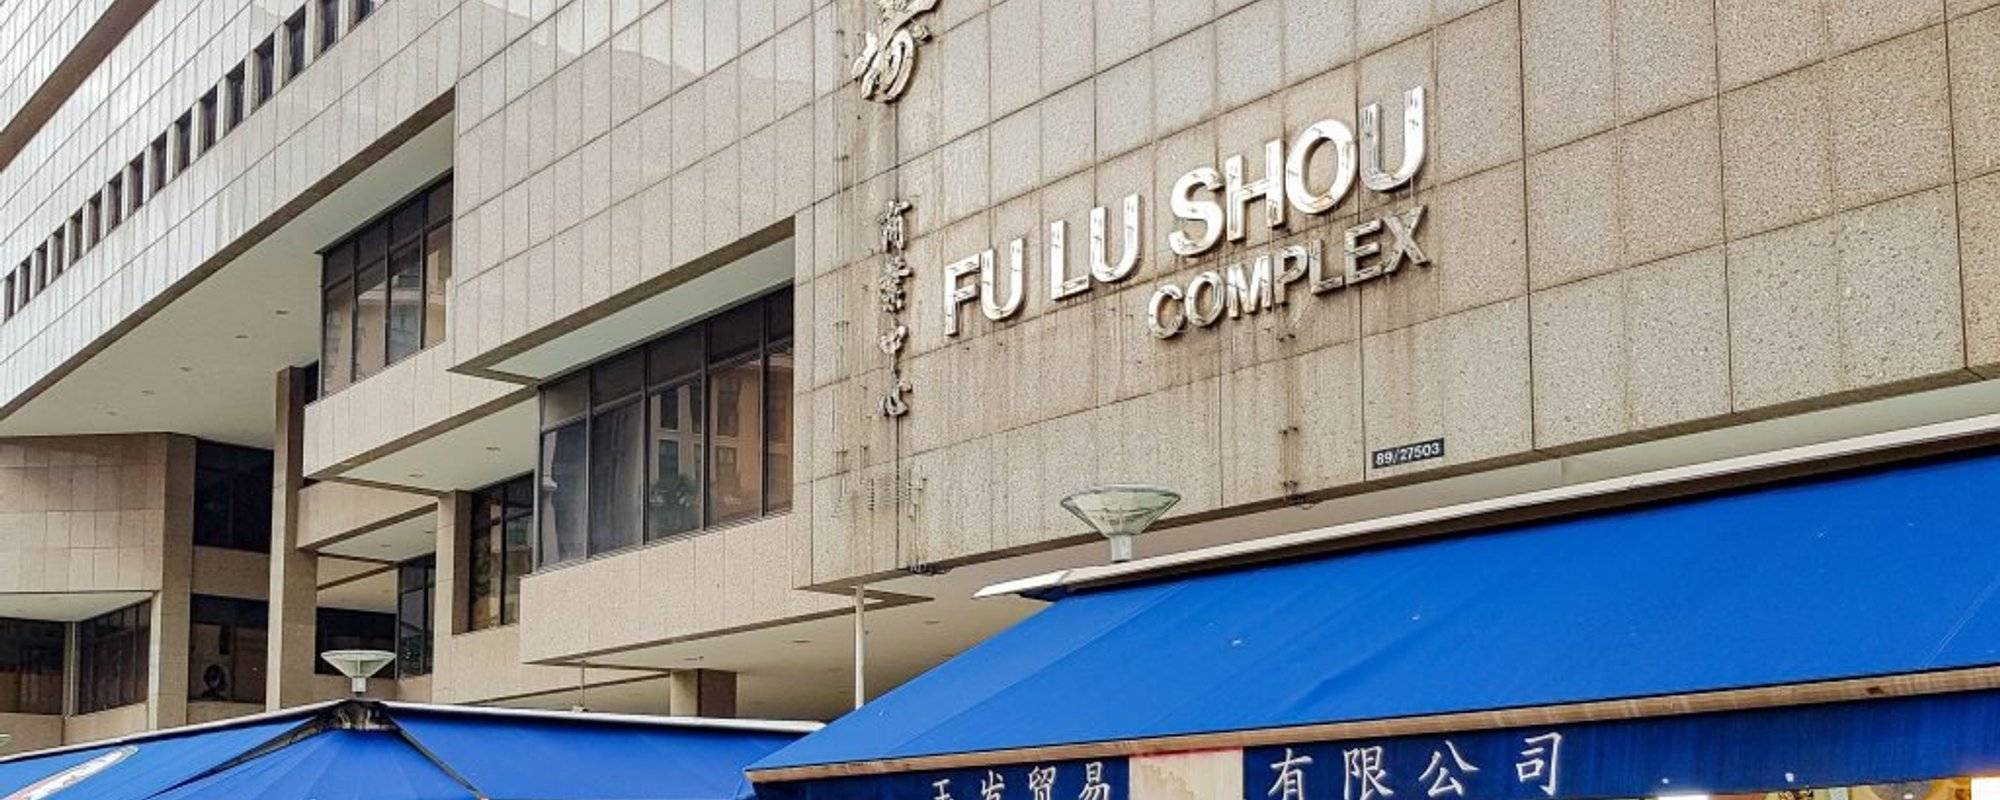 Fu Lo Shou Complex in Singapore for Thai (and other) amulets and repair services too!